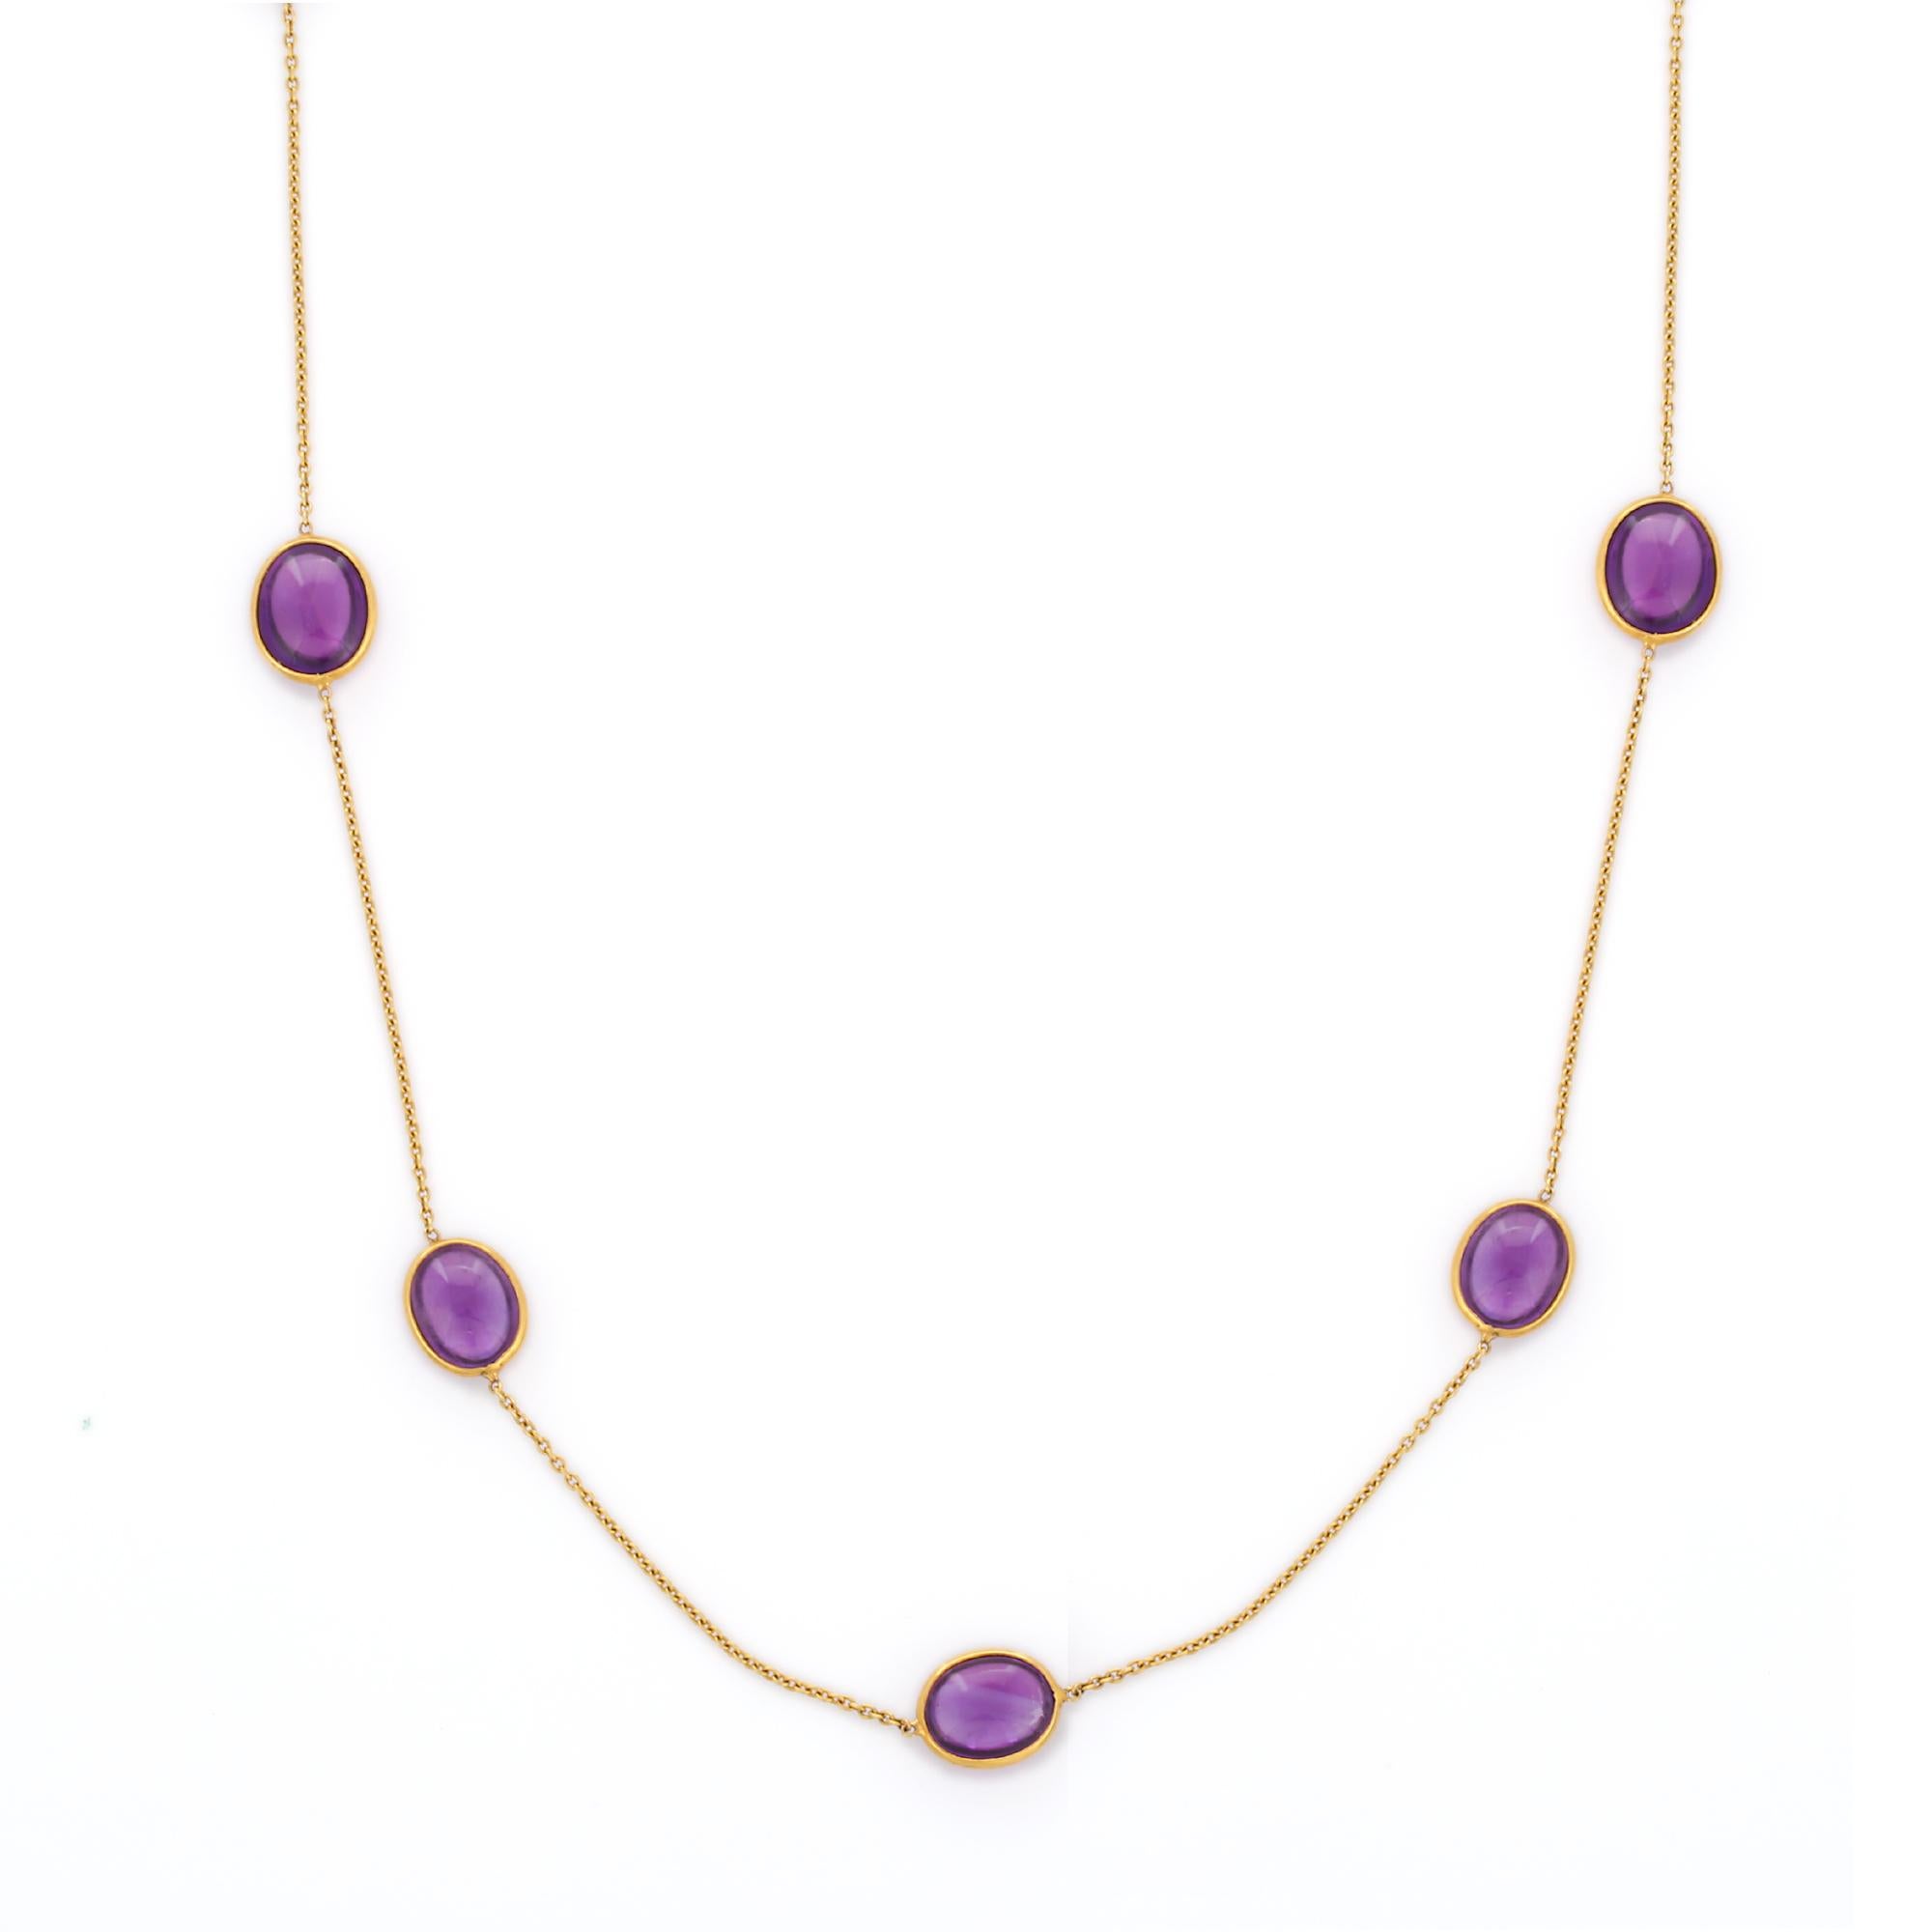 Amethyst Necklace in 18K Gold studded with oval cut amethyst gemstones.
Accessorize your look with this elegant amethyst chain necklace. This stunning piece of jewelry instantly elevates a casual look or dressy outfit. Comfortable and easy to wear,